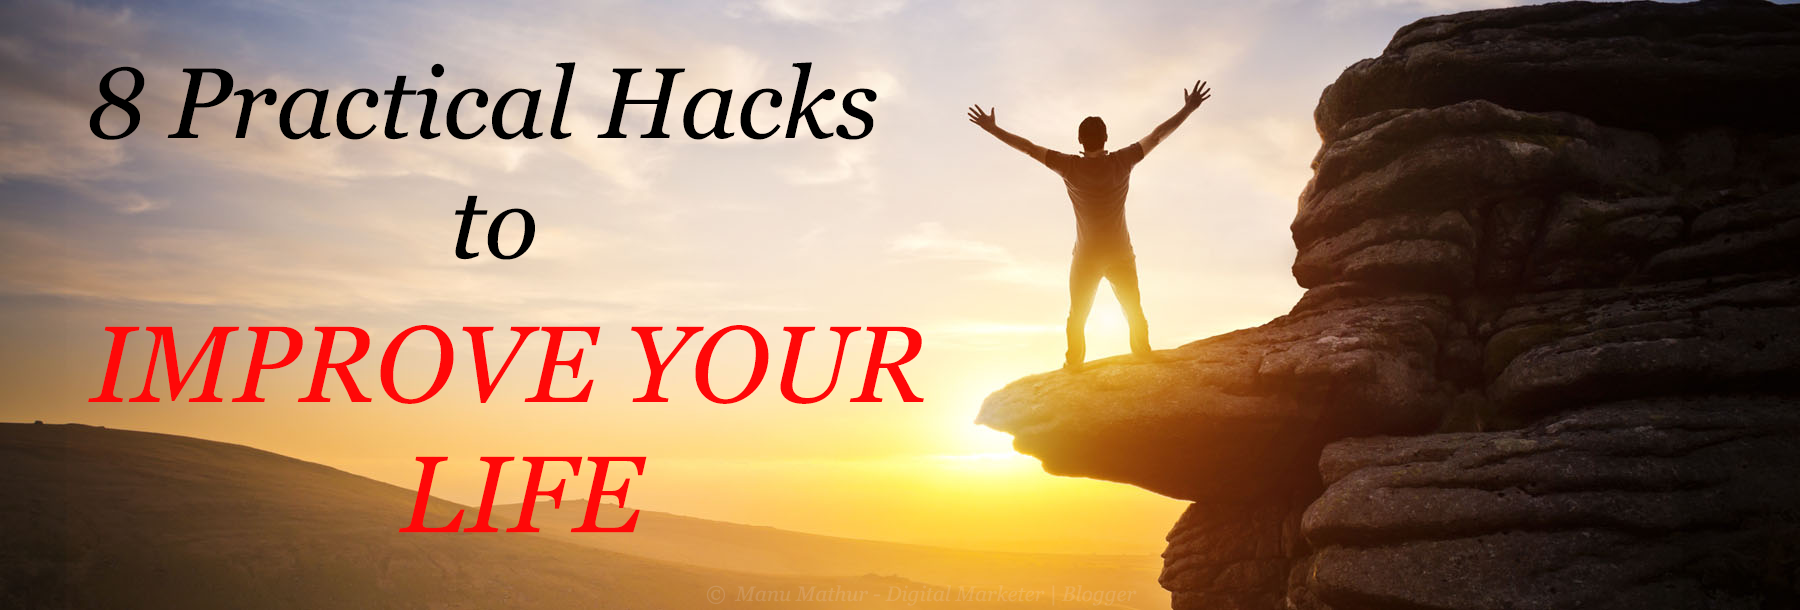 Improve Your Life Instantly – 8 Practical Hacks That Work